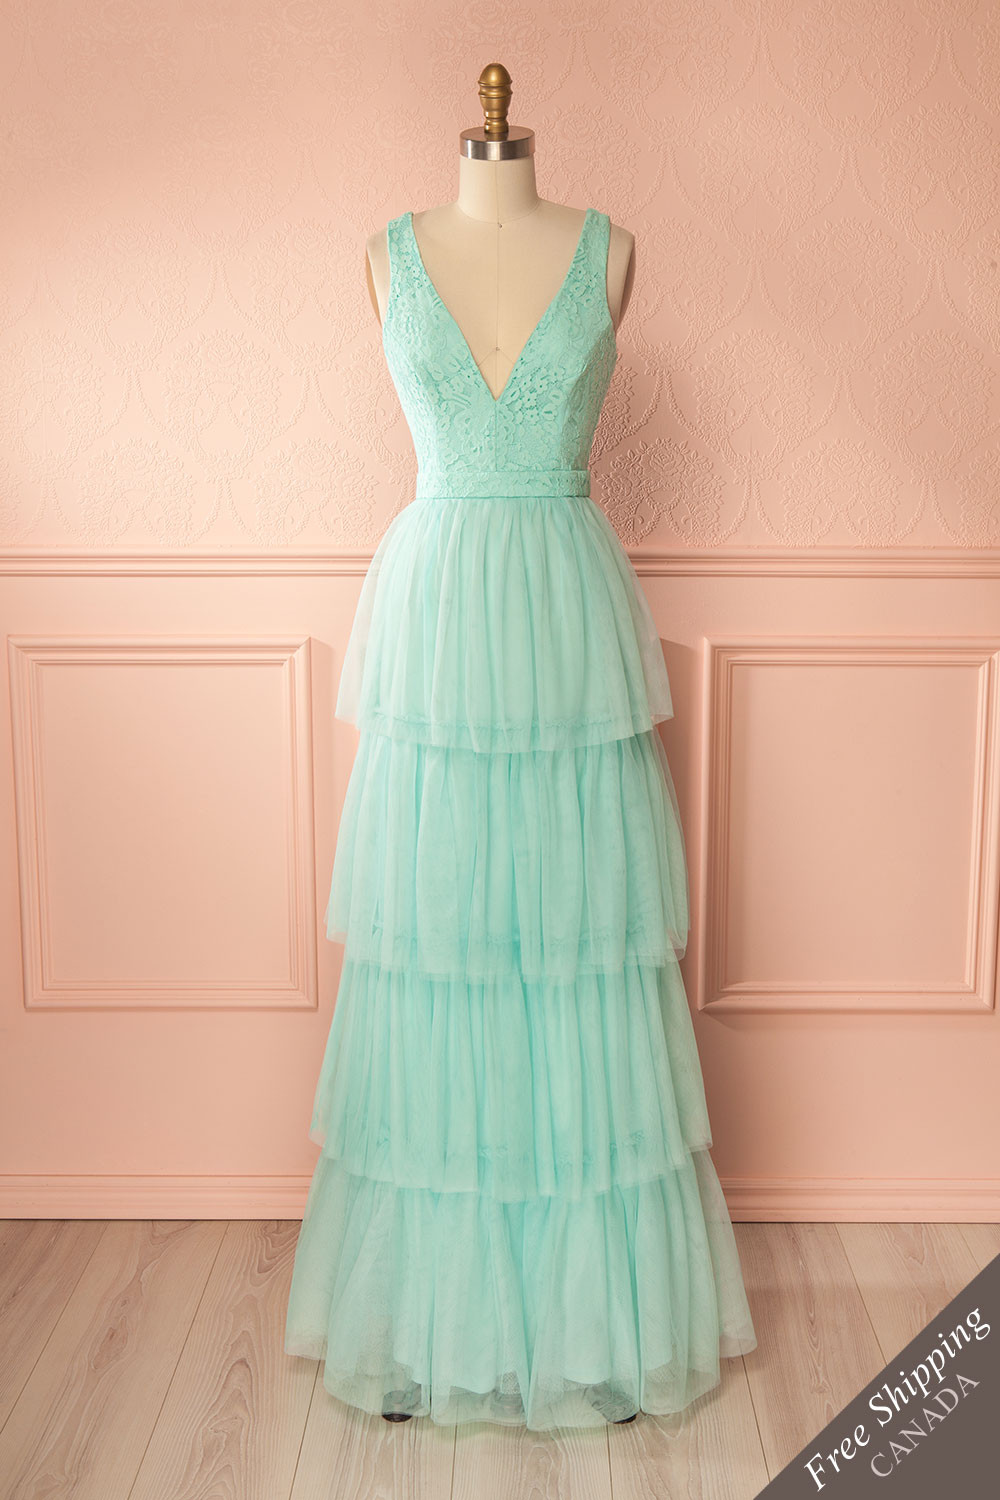 Deep V Neck A Line Long Tulle Mint Green Lace Top Evening Dress,long Tulle Grey Lace Top Prom Dress,wedding Party Dress,a Line Long Mint Green